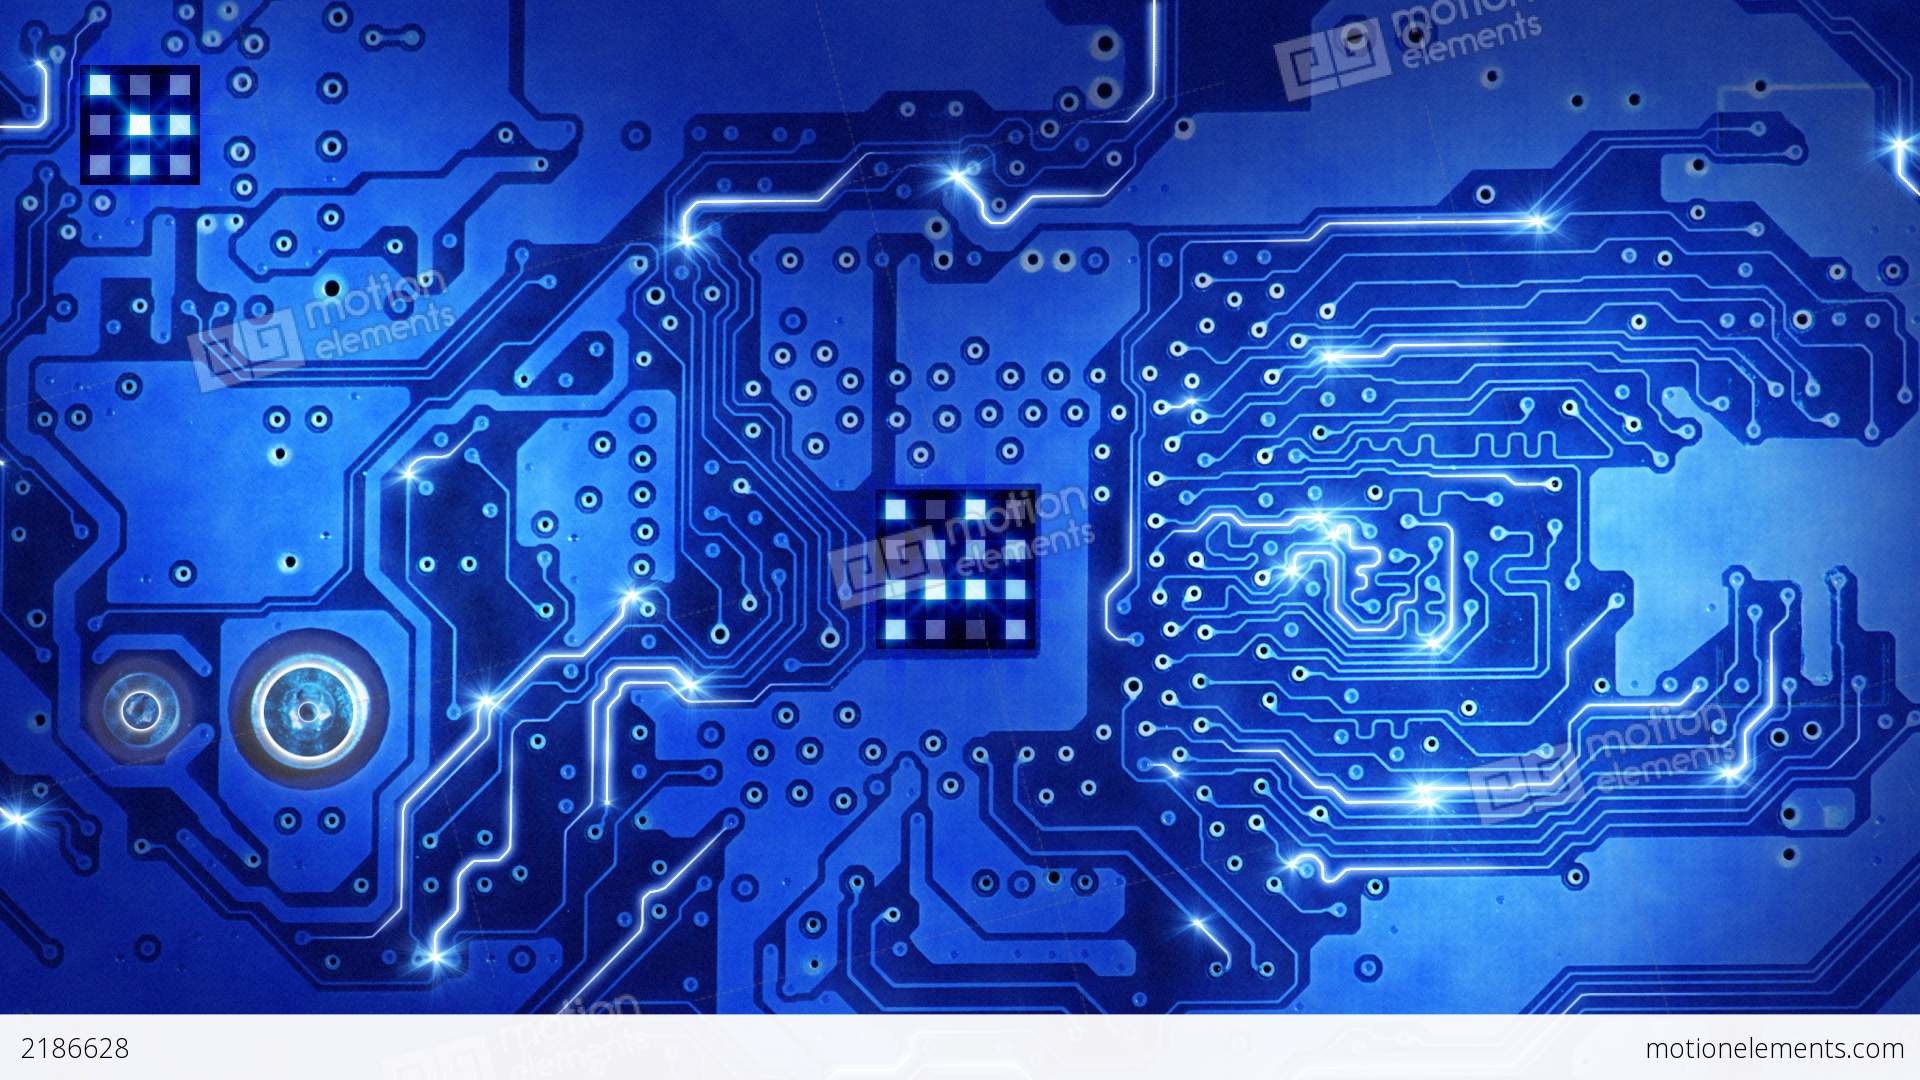 1920x1080 me2186628-computer-circuit-board-blue-loopable-background-hd-